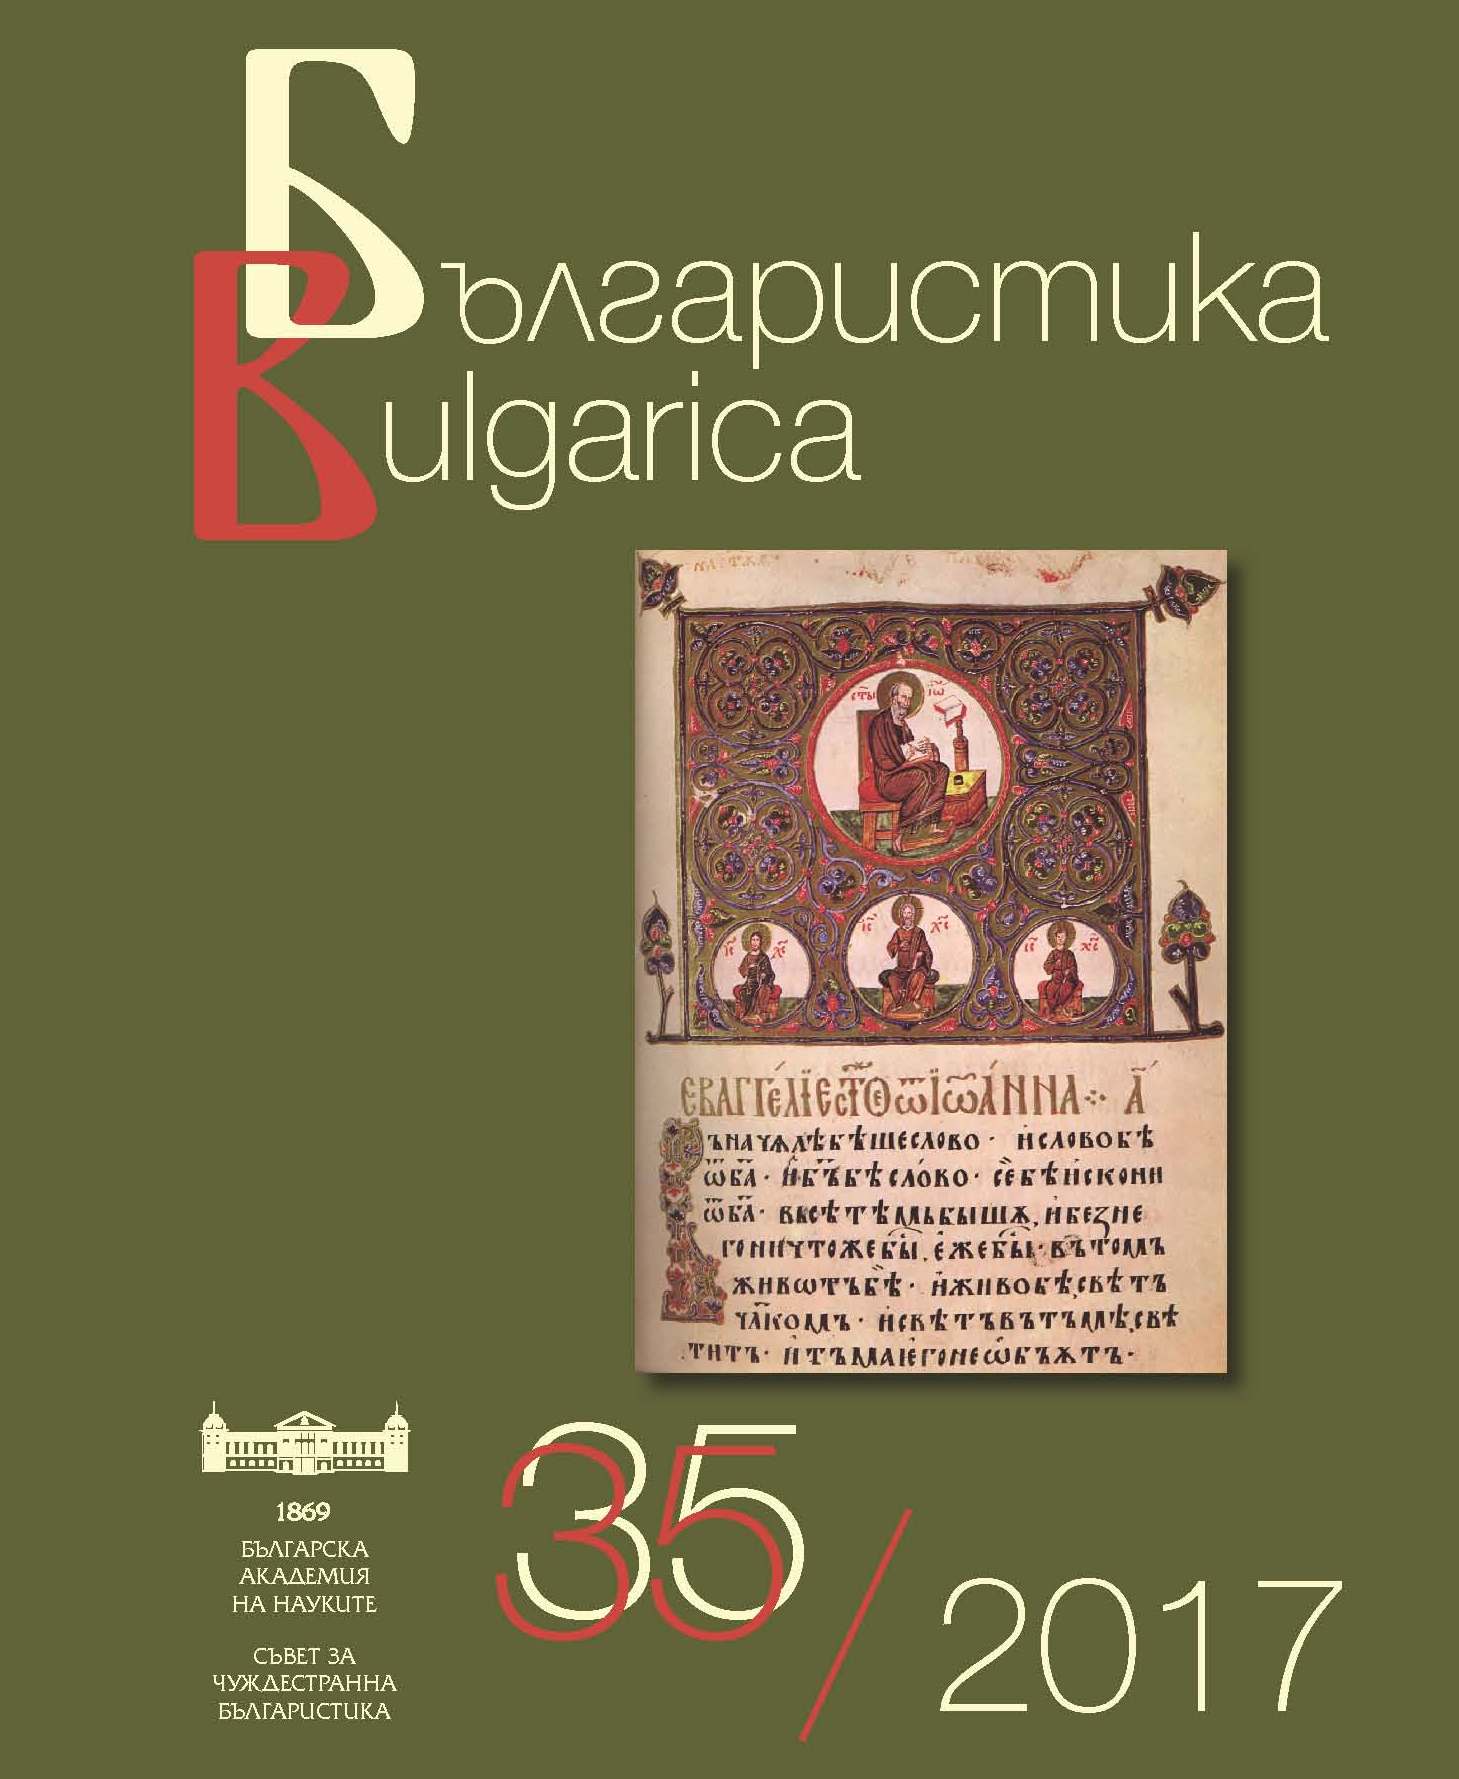 International Conference “The Zograf Library and Archives: Research Approaches to Digitizing, Cataloguing and Editing the Sources” Cover Image